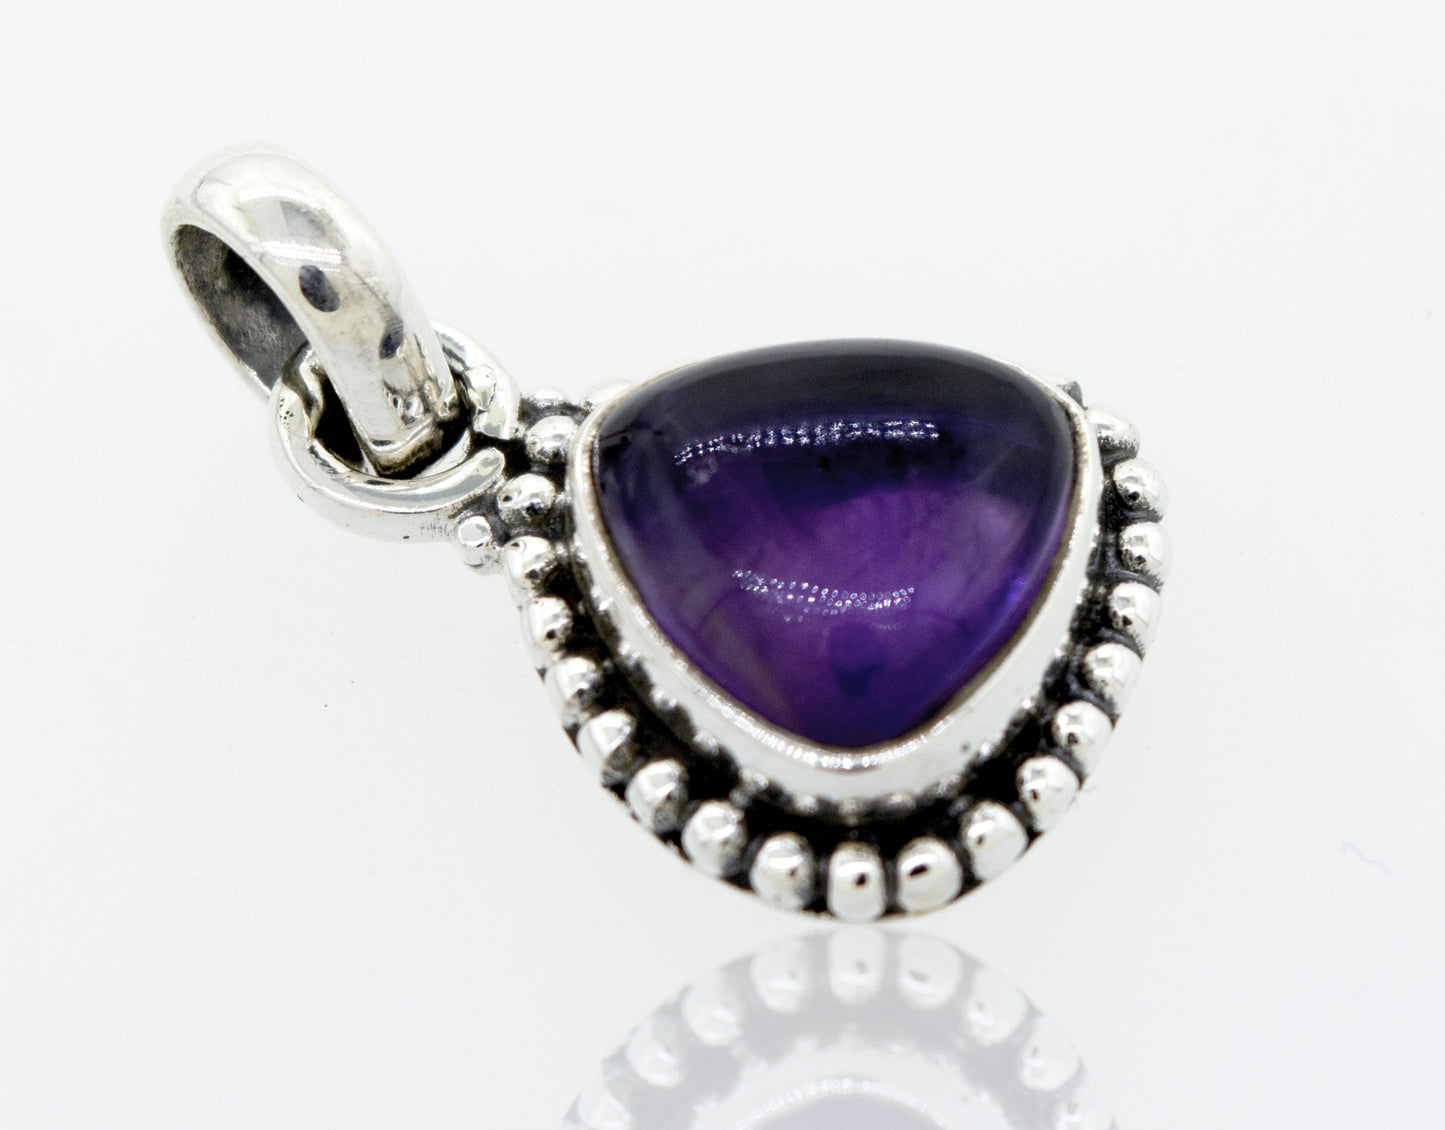 Beautiful Super Silver Triangular Shape Amethyst Pendant With Beads Design in a sterling silver setting.